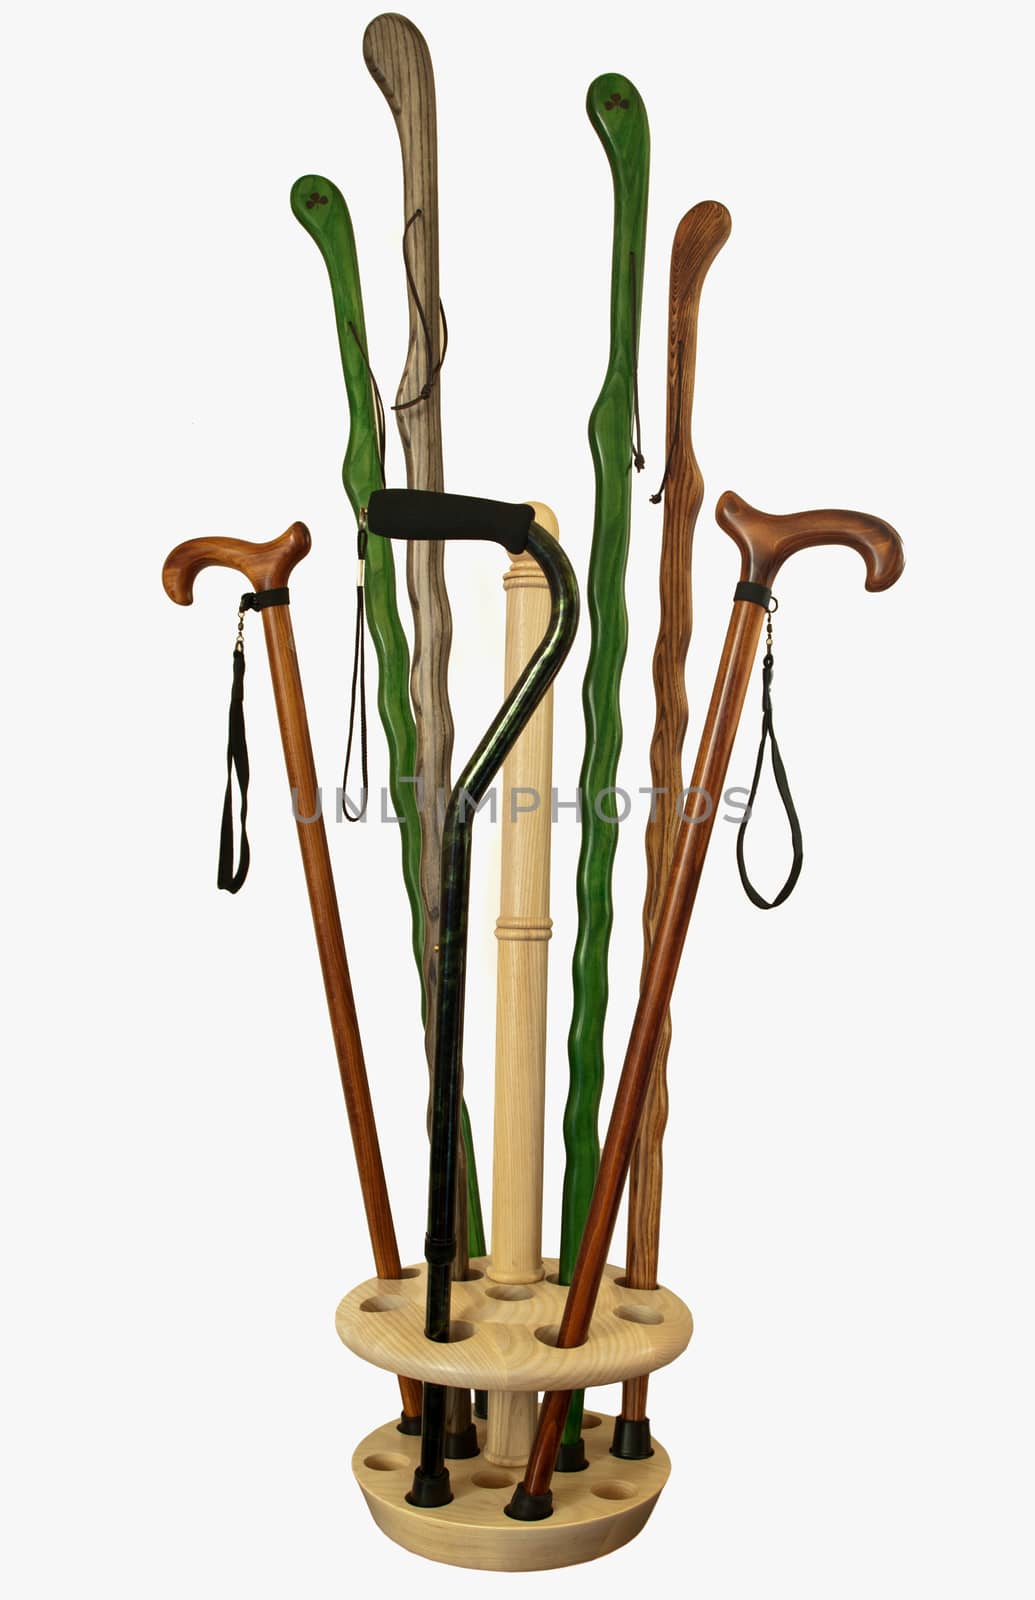 assorted canes and walking sticks in a wooden holder